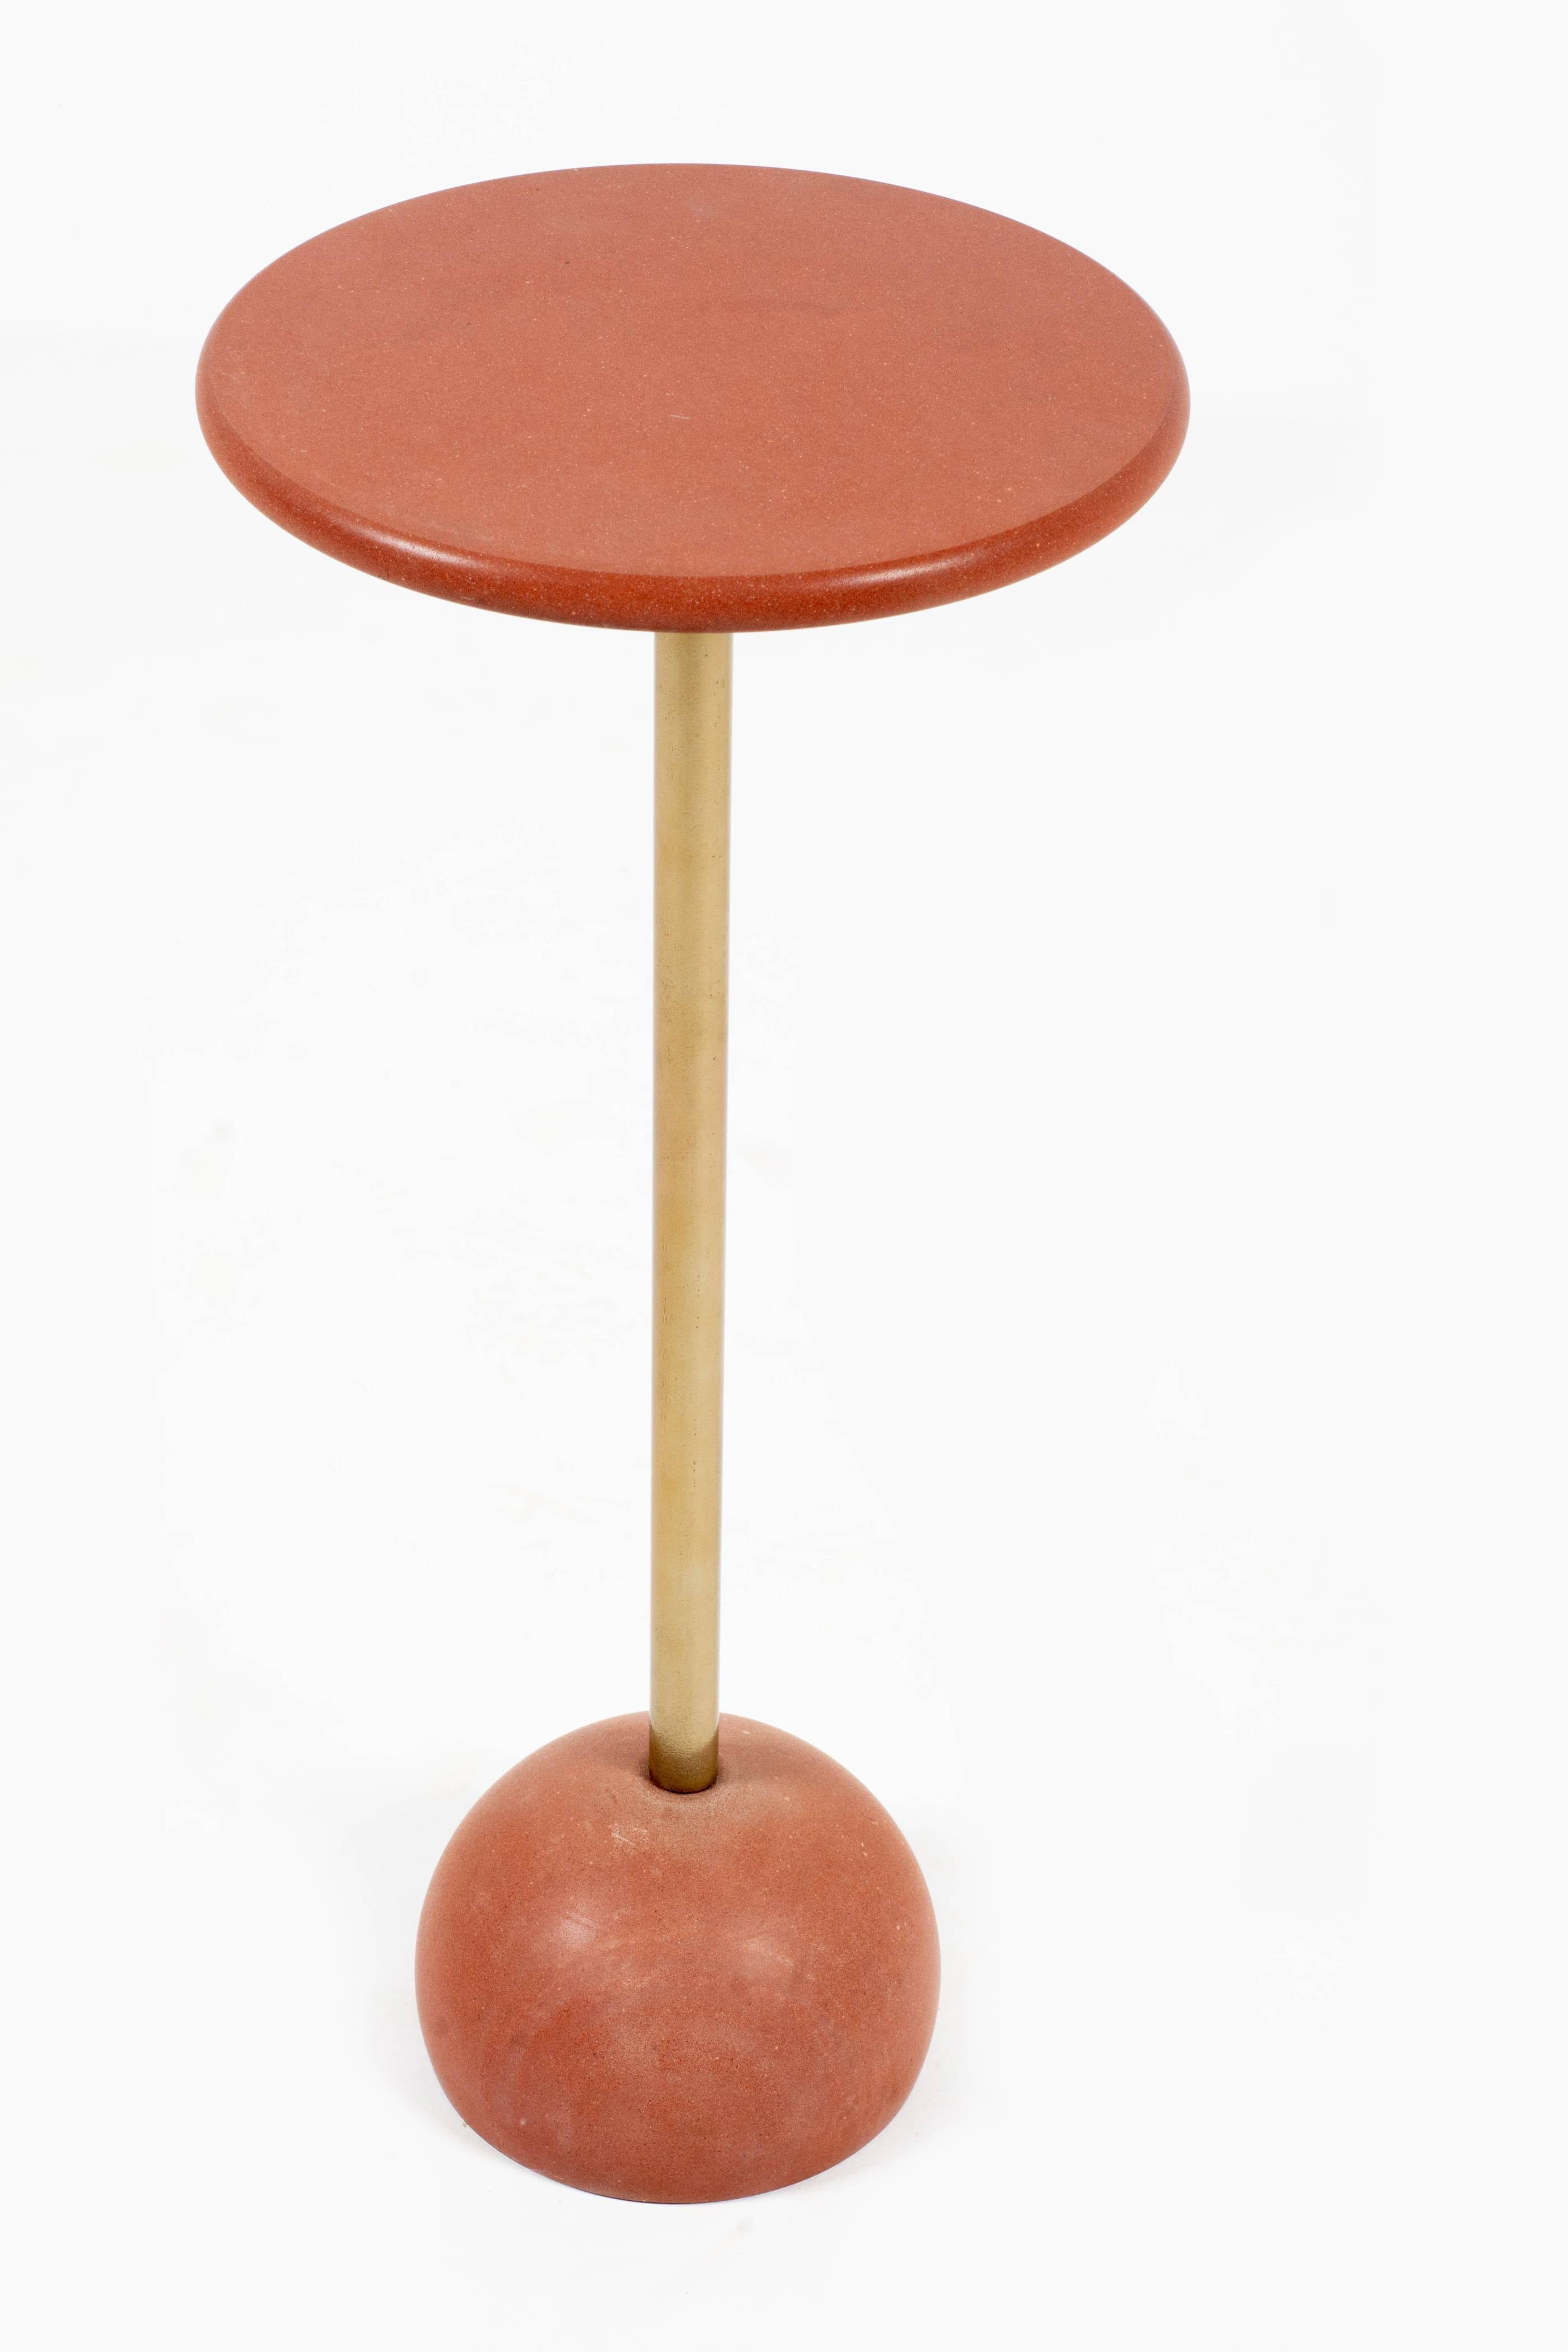 MONOLITH RED STONE - SMALL WHITE ROUND SIDE TABLE